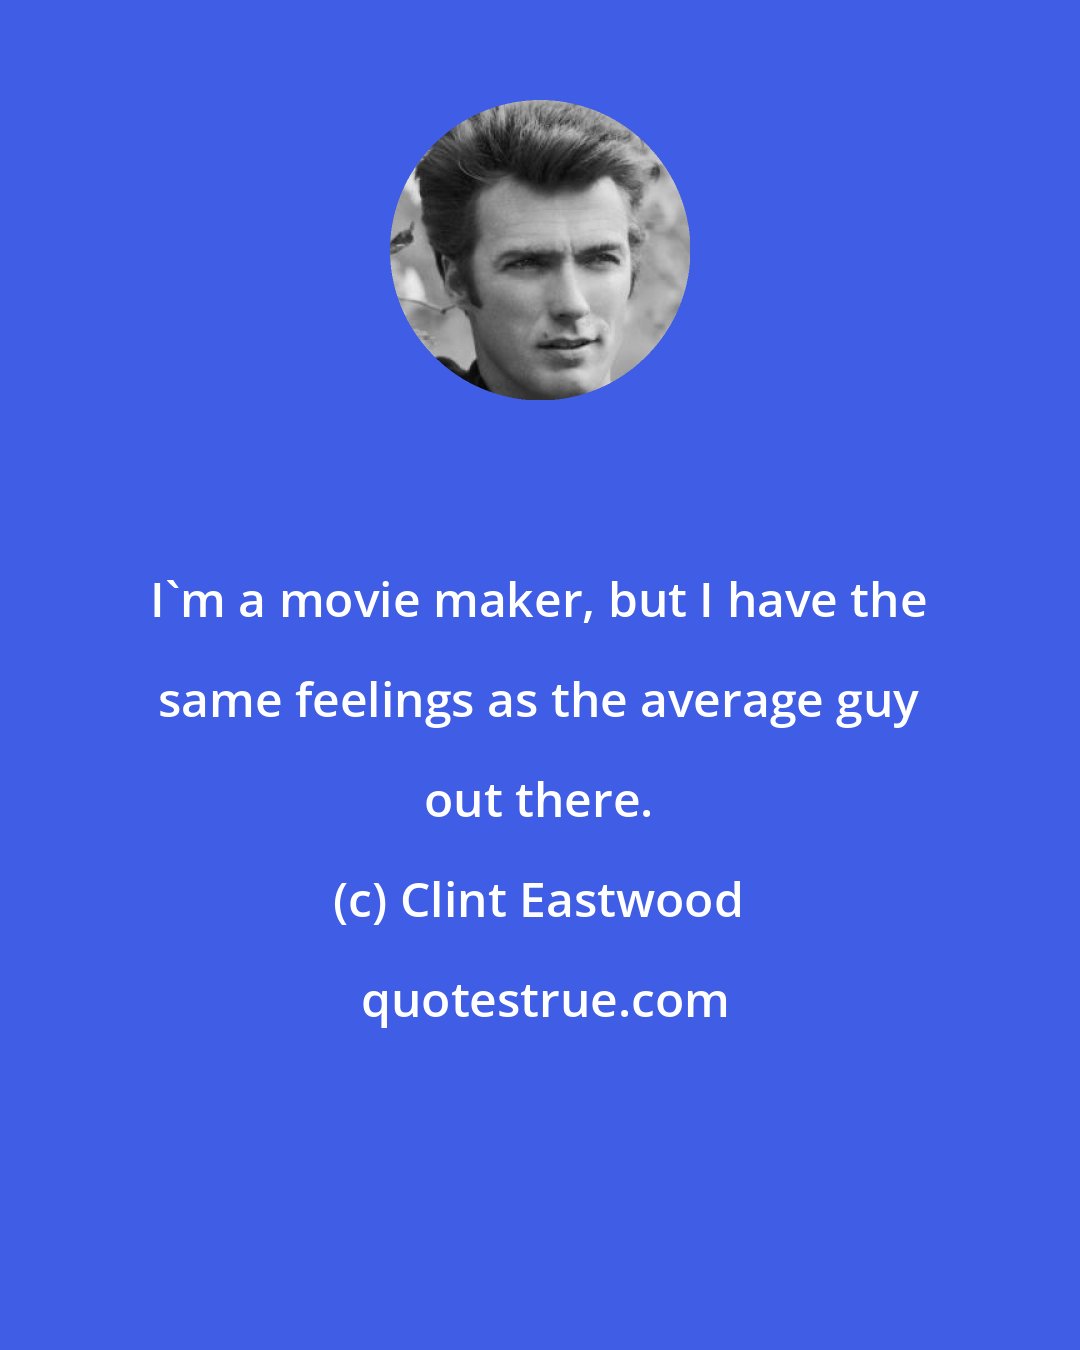 Clint Eastwood: I'm a movie maker, but I have the same feelings as the average guy out there.